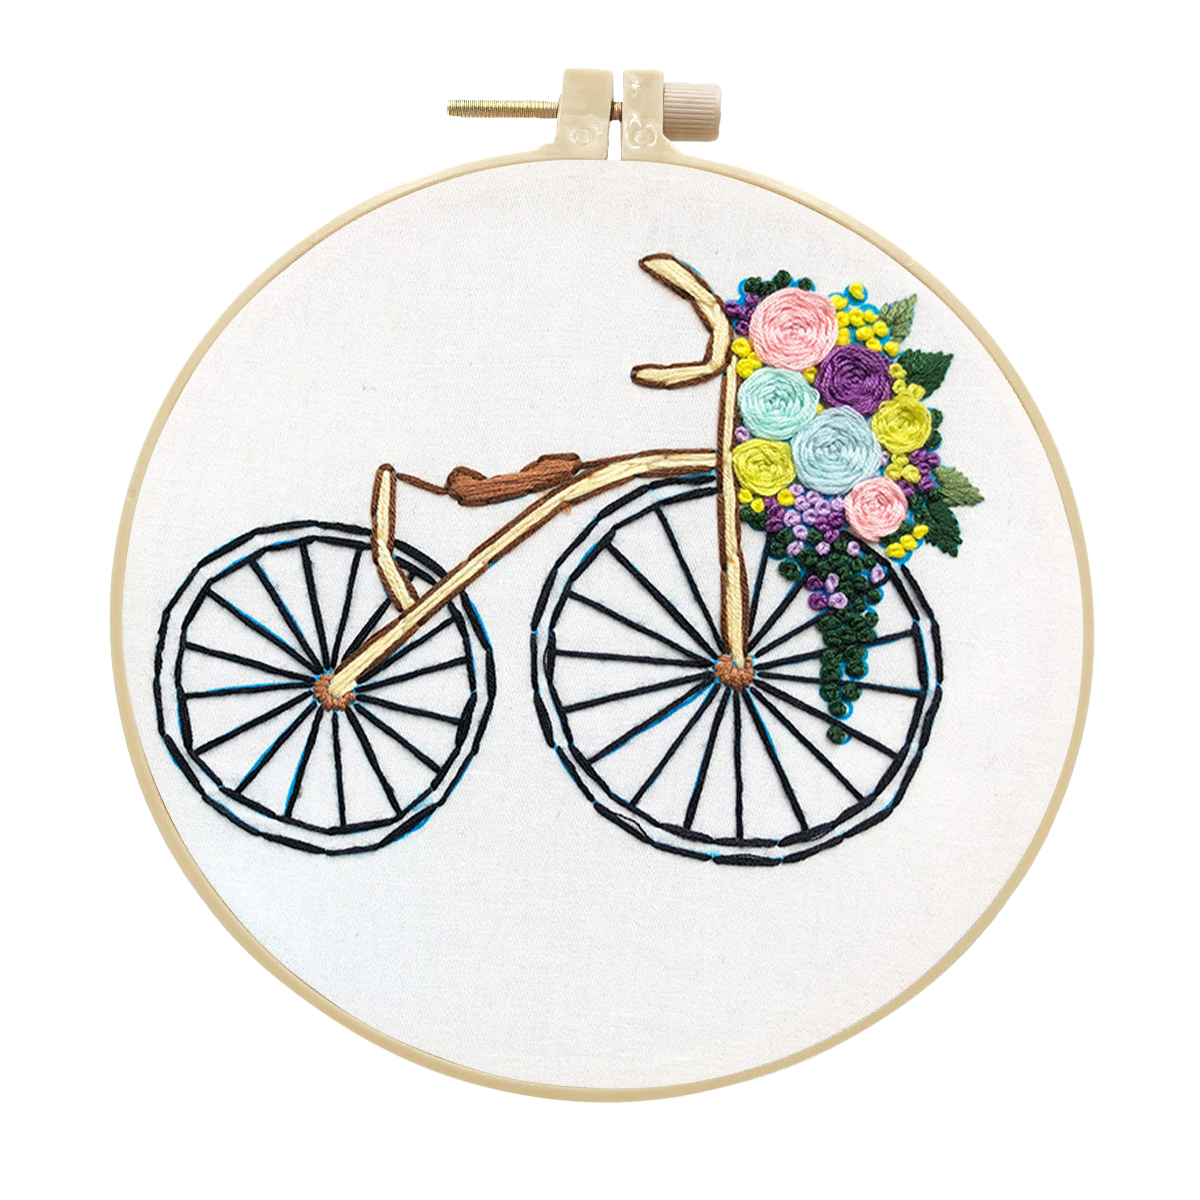 DIY Craft Handmade Embroidery kit for Adult - Bicycle and Flowers Pattern